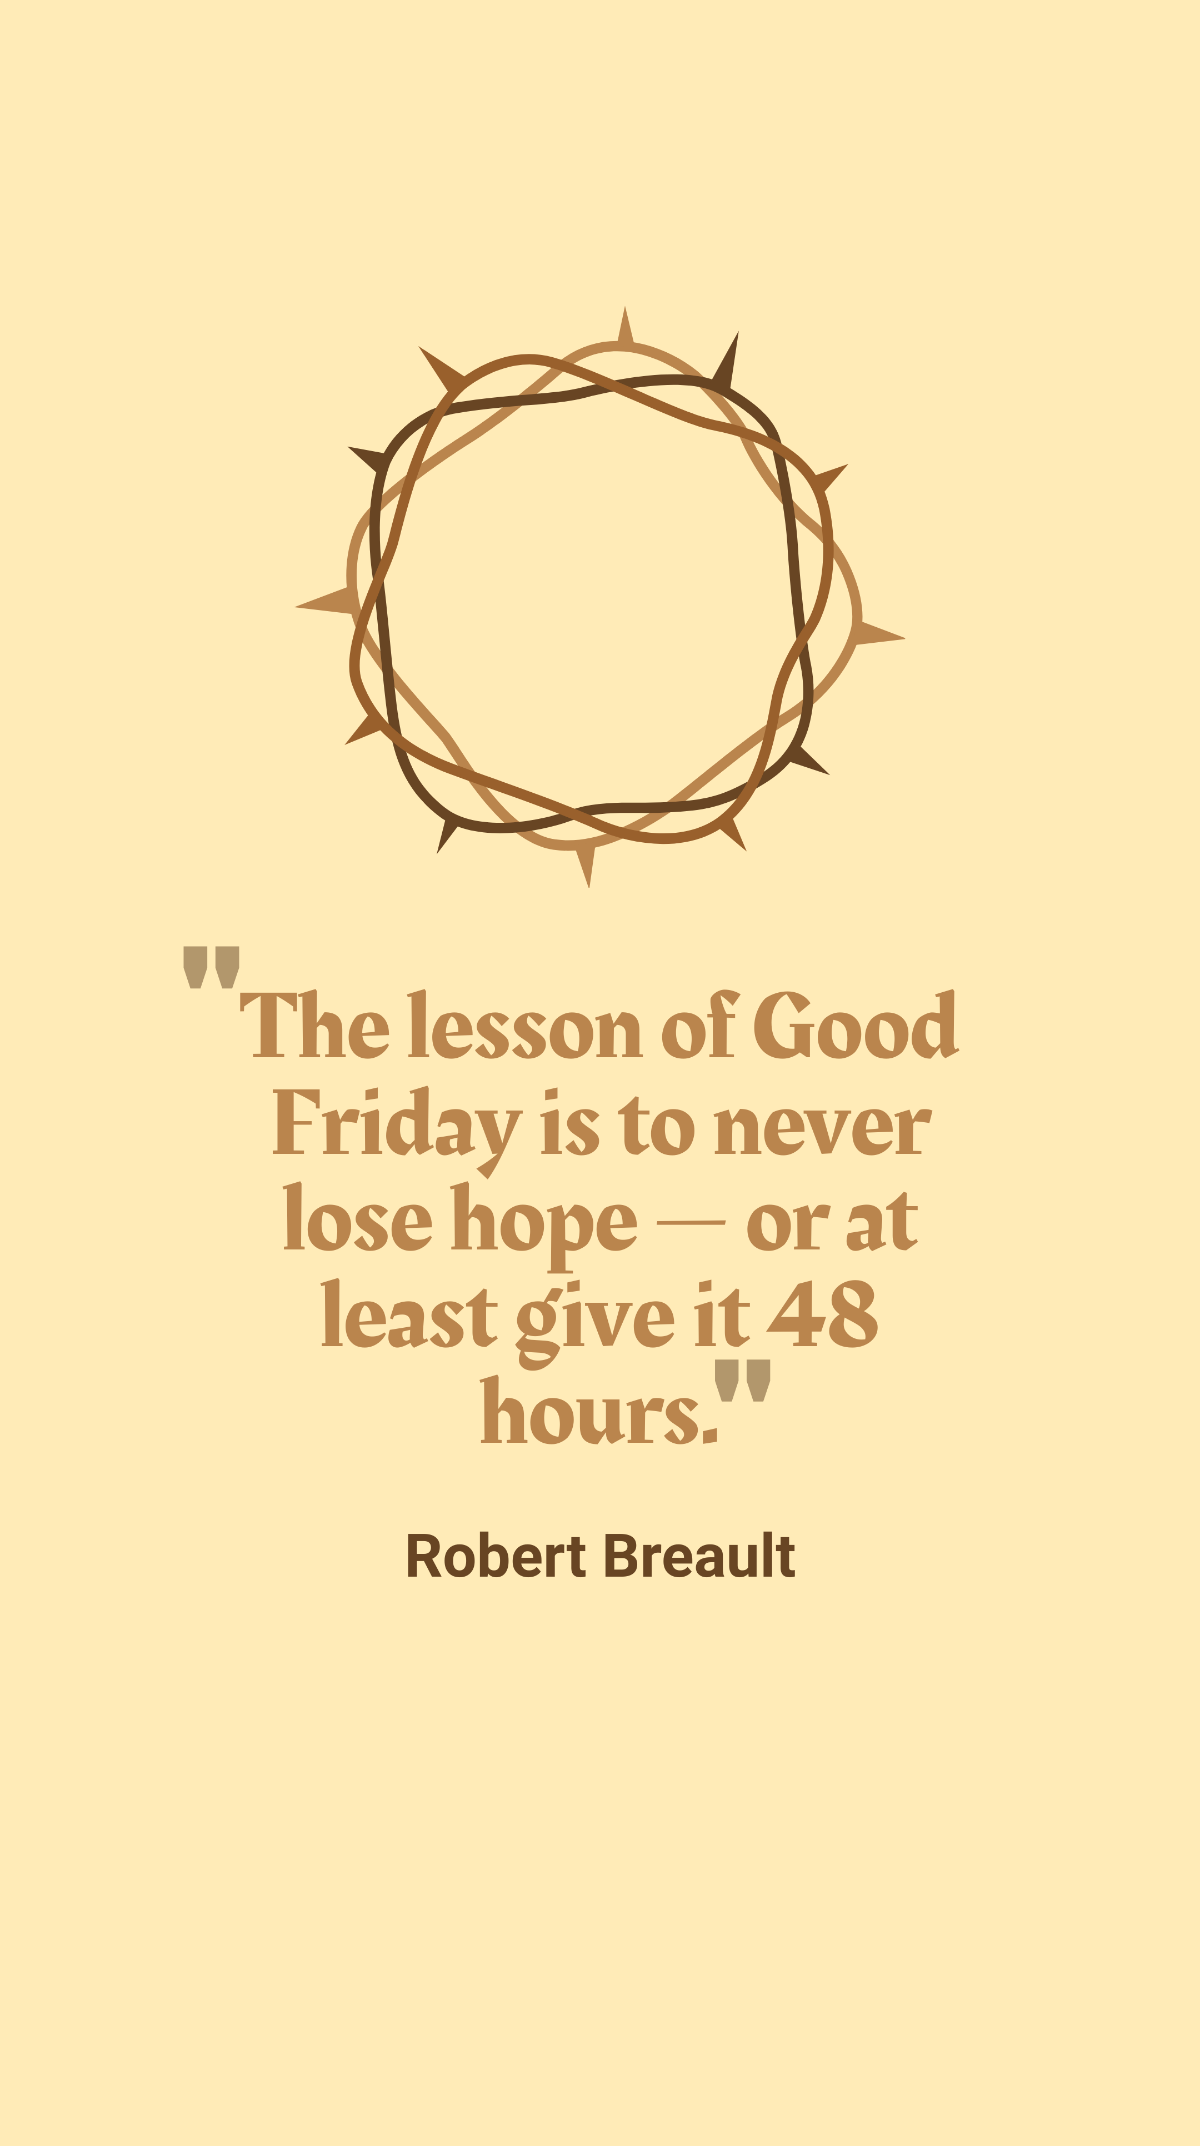 Robert Breault - The lesson of Good Friday is to never lose hope — or at least give it 48 hours. Template